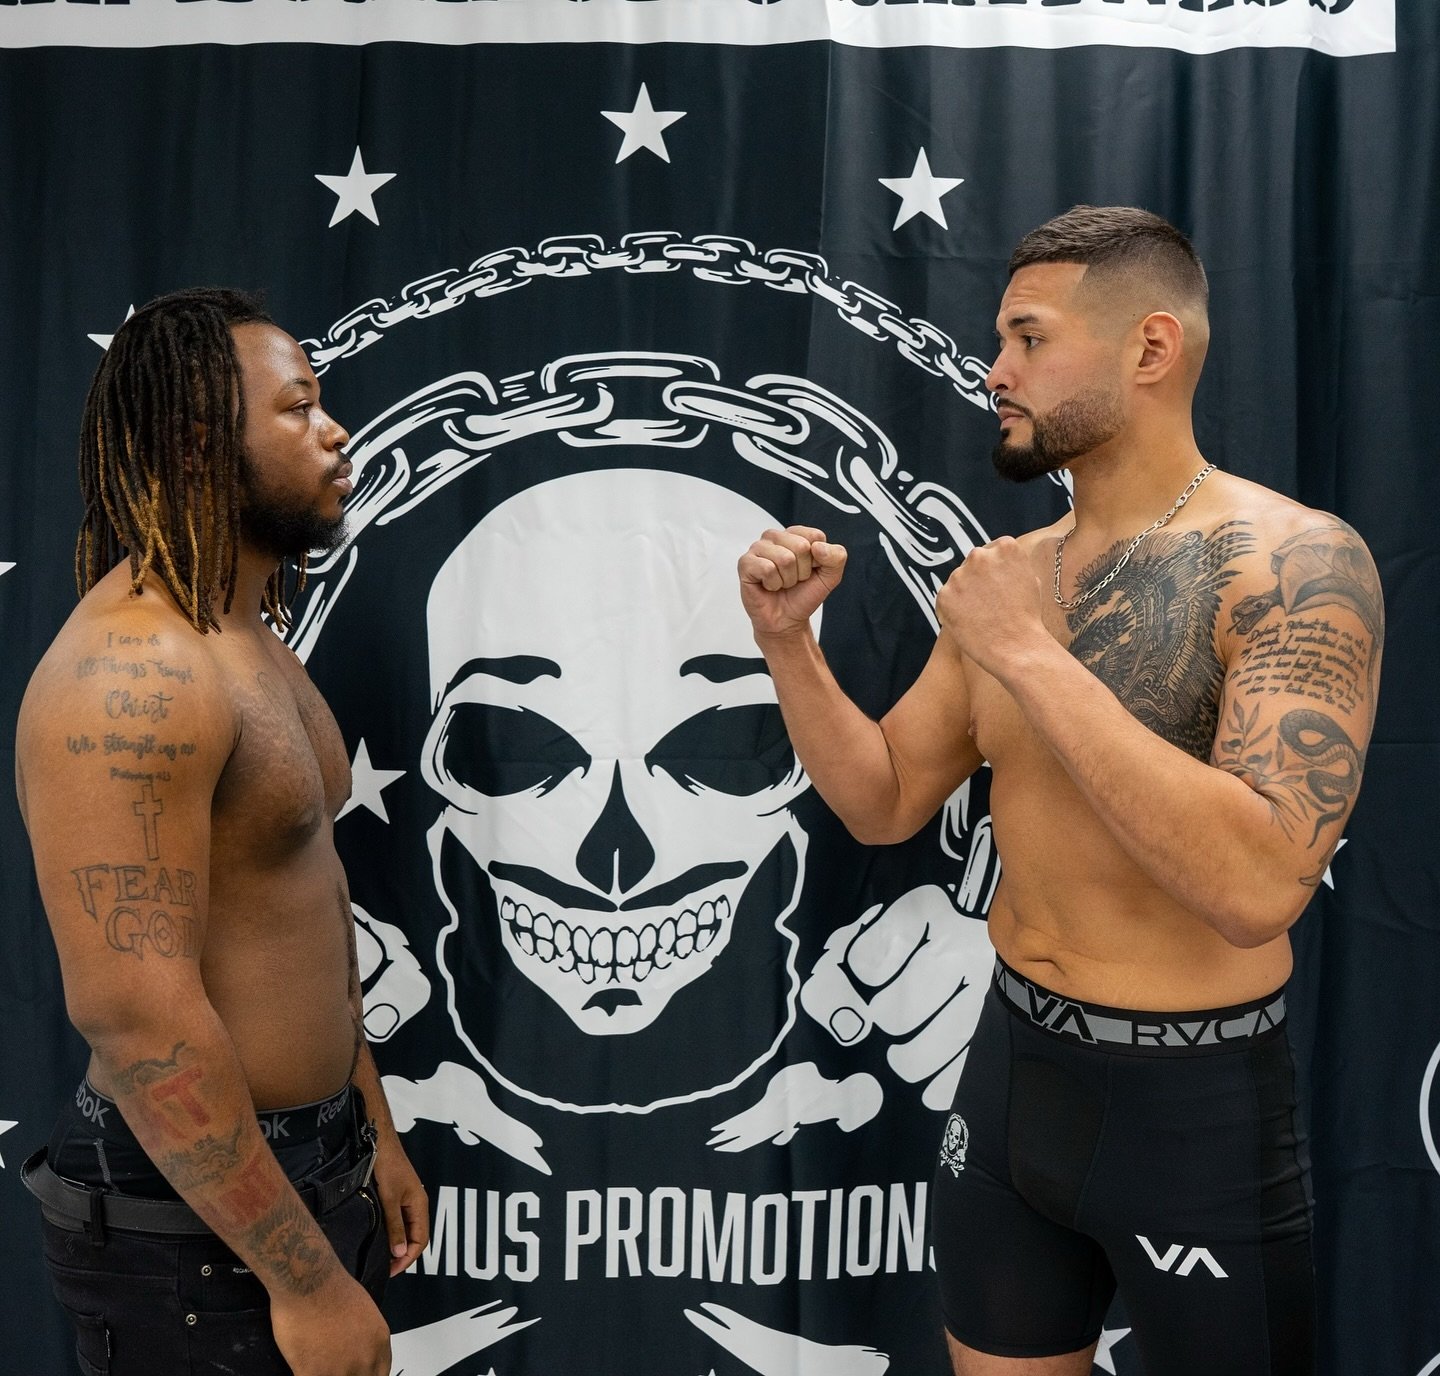 MMA Banger 😤
@jellyfam512 vs @h_trevino 
.
It all goes down tonight! Tickets will be available at the door! Can&rsquo;t make it? Order the pay-per-view! Link in bio
Doors open at 5:30pm
Show starts at 6:30pm
.
Venue: The PIAZZA
85 Executive Dr. Auro